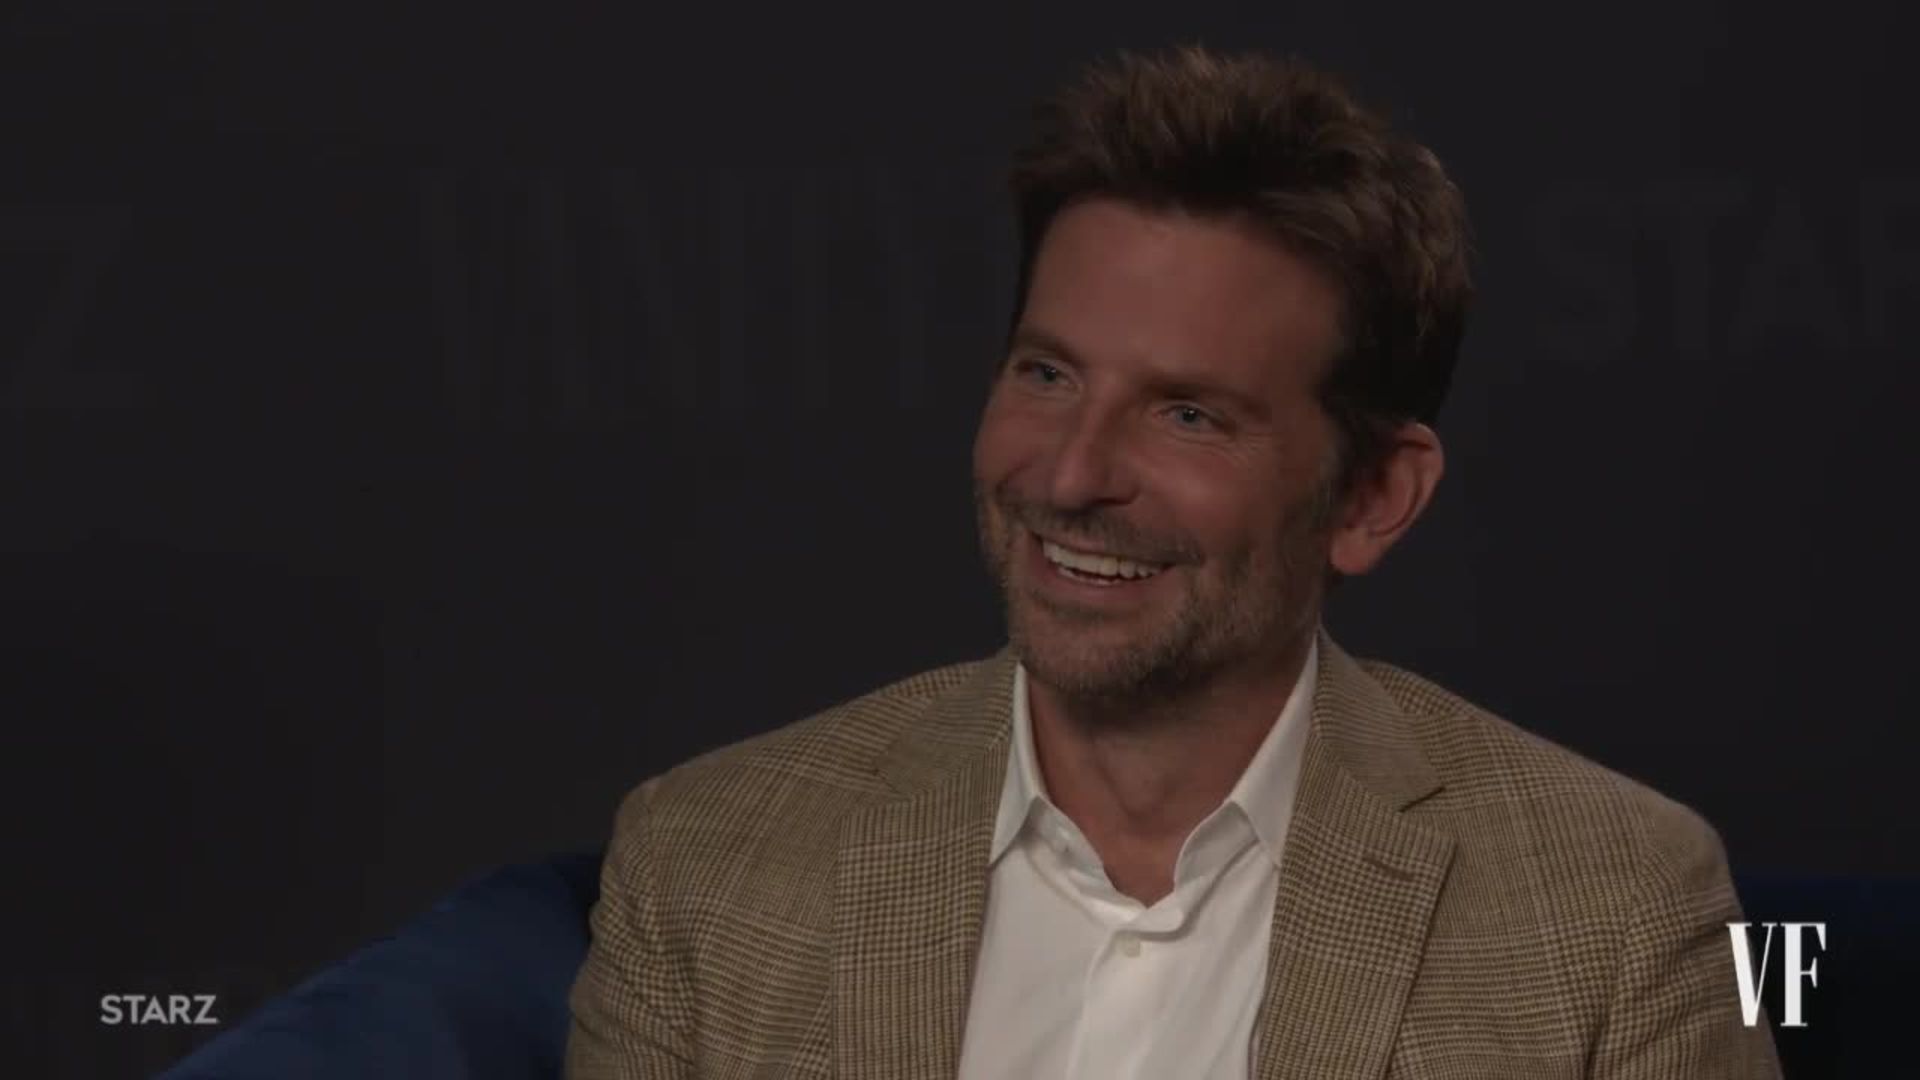 Bradley Cooper sad as 'The Hangover' series comes to an end